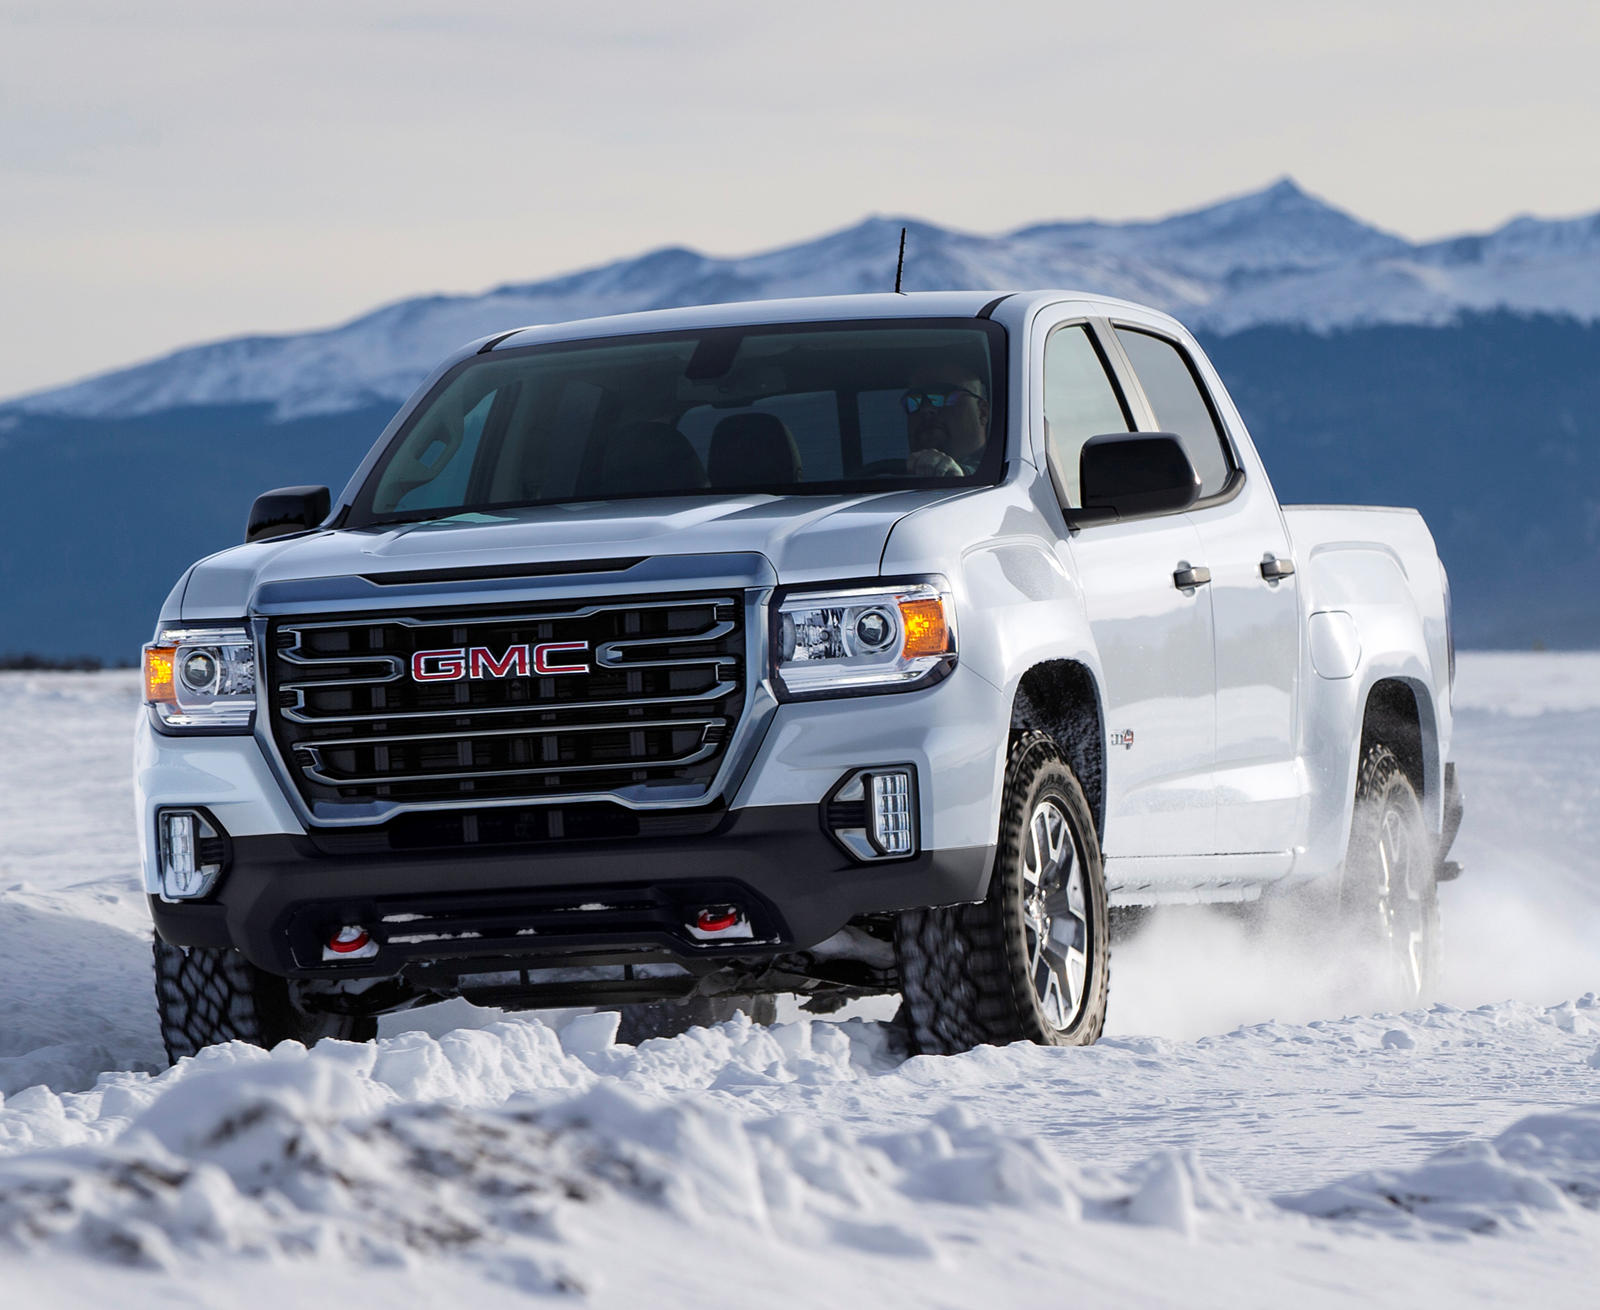 move-over-cadillac-gmc-is-the-new-luxury-leader-carbuzz